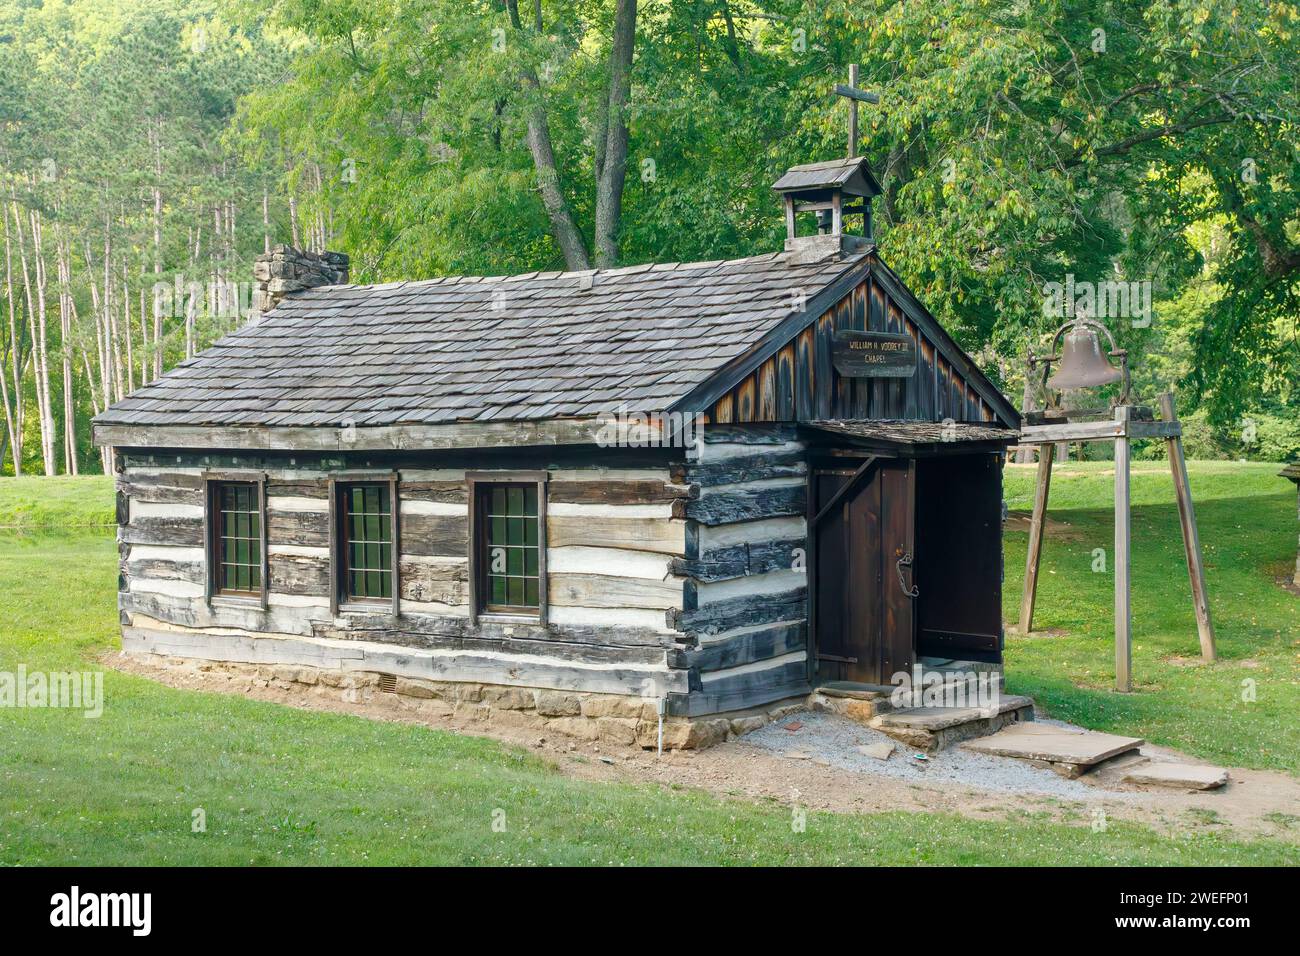 William H Vodrey III Chapel. Gaston's Mill and Pioneer Village at Beaver Creek State Park, East Liverpool, Ohio, USA. Stock Photo